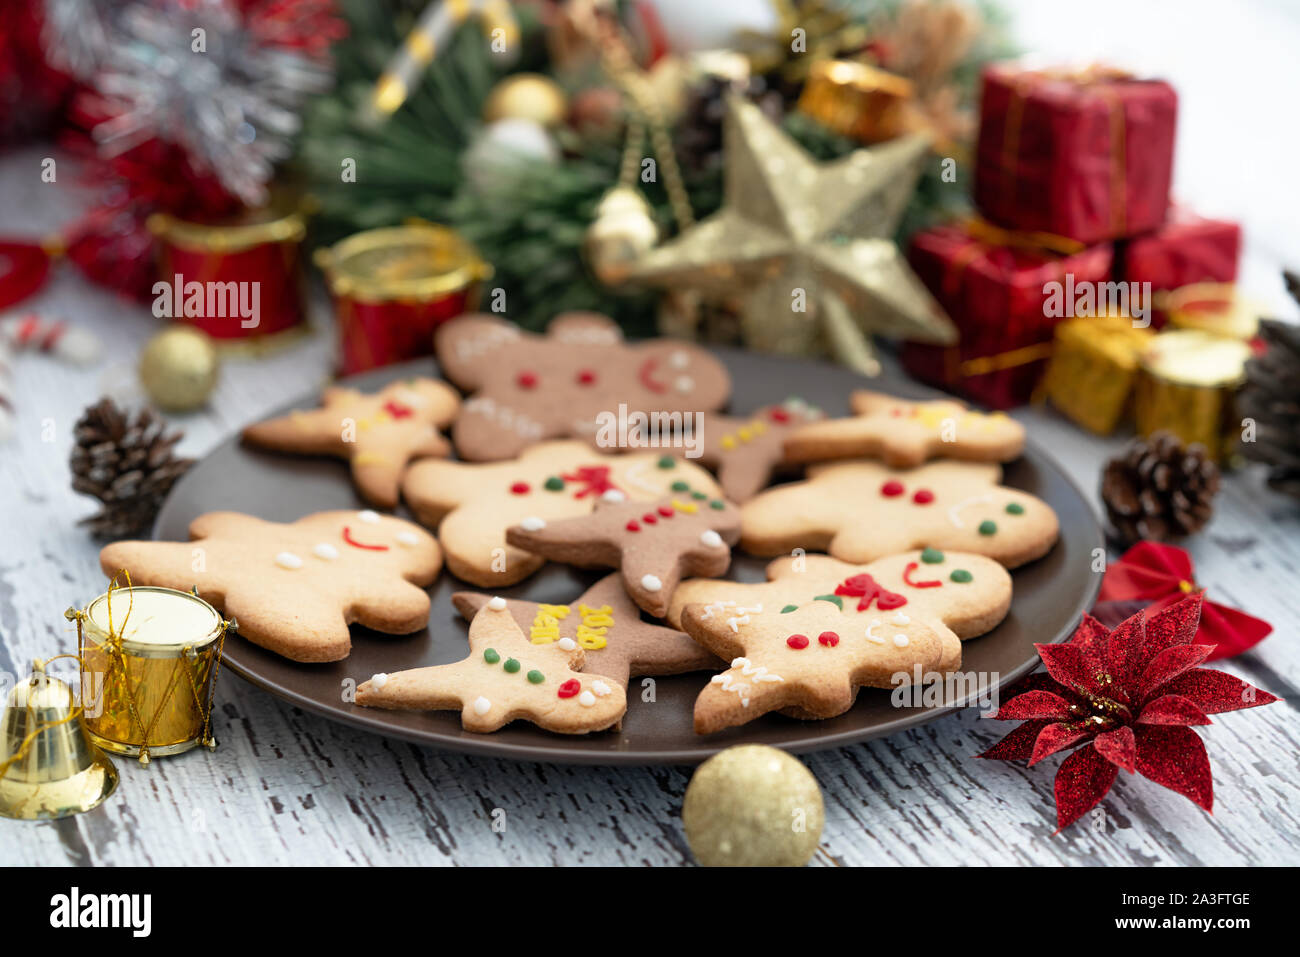 Presenting traditional gingerbread cookies with ornaments for christmas celebration. Stock Photo